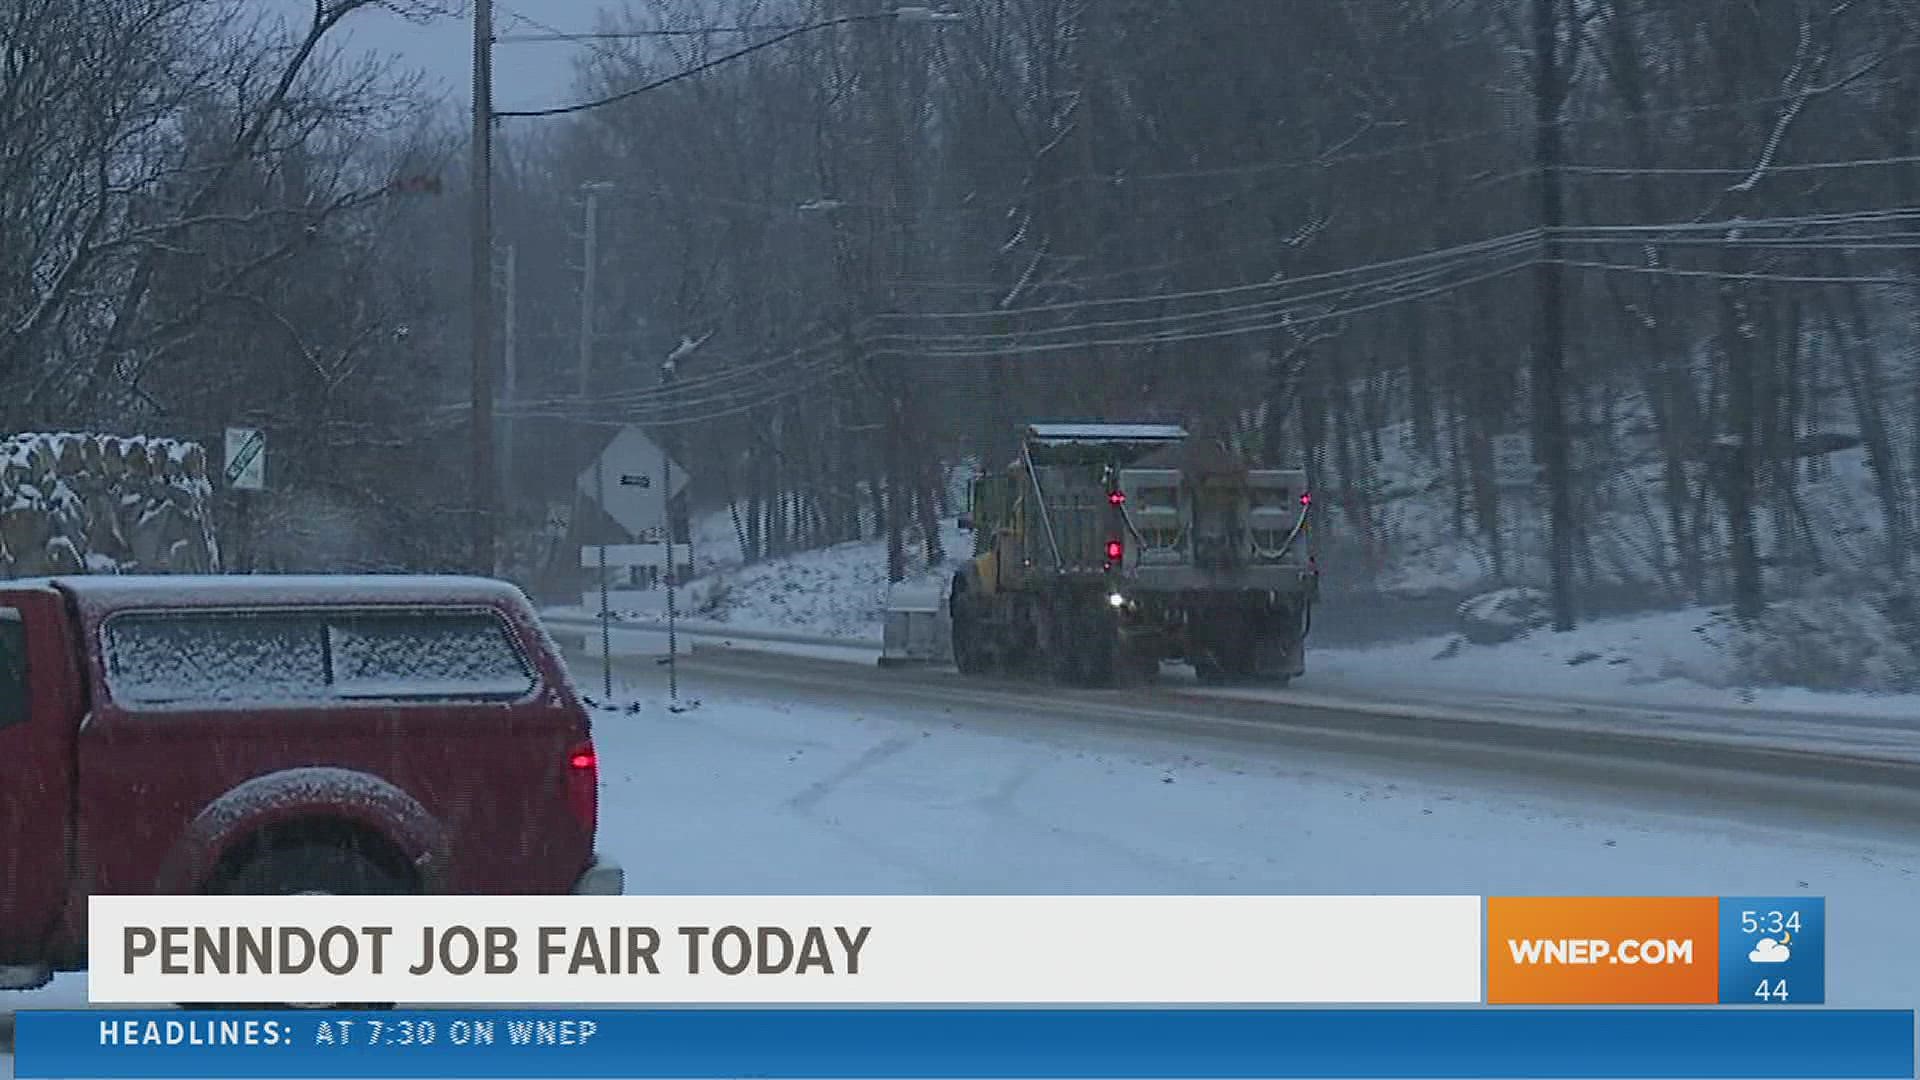 The snow will be falling on roads and highways before you know it, and PennDOT needs workers to get rid of it.